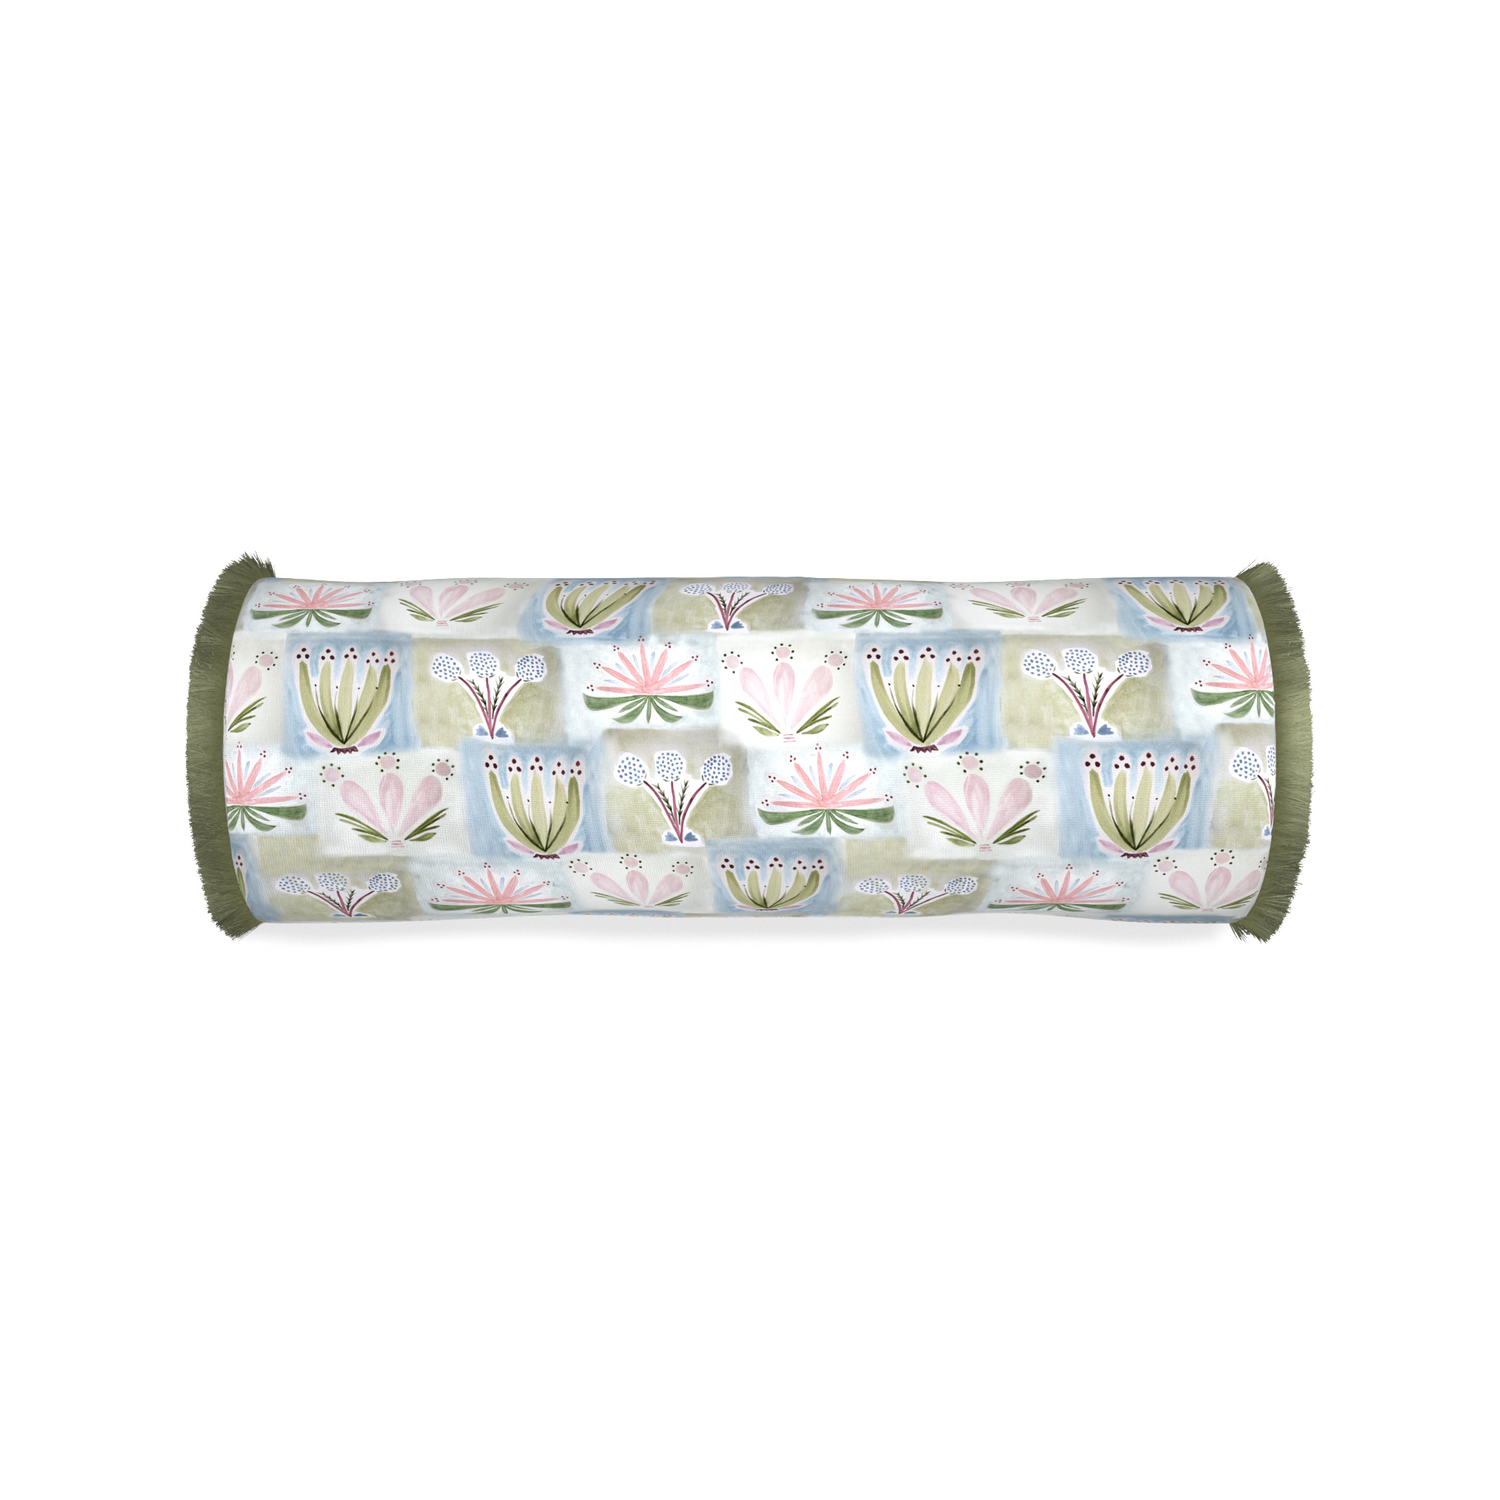 Bolster harper custom hand-painted floralpillow with sage fringe on white background